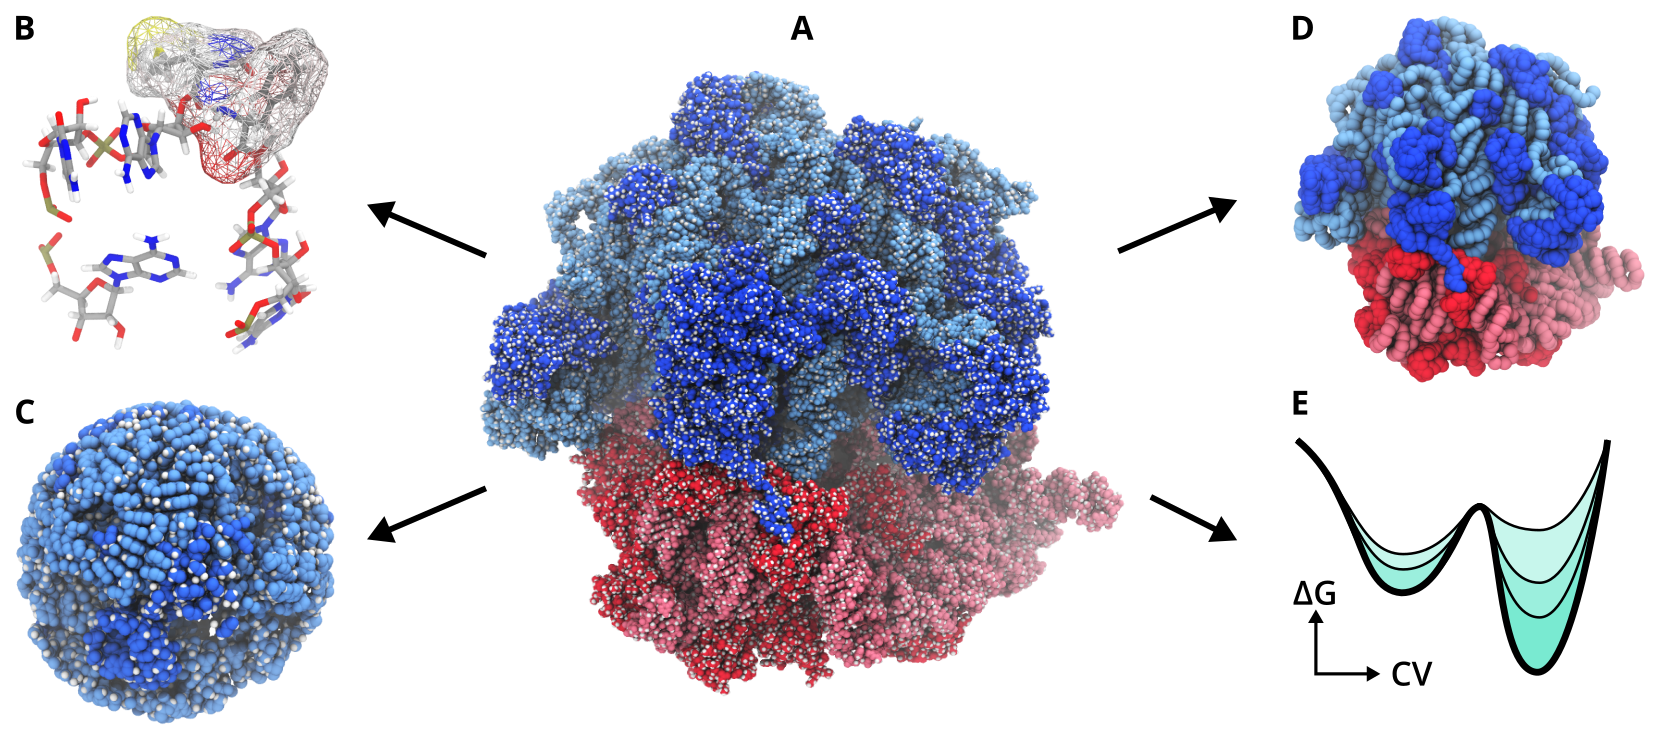 A review about ribosome simulations